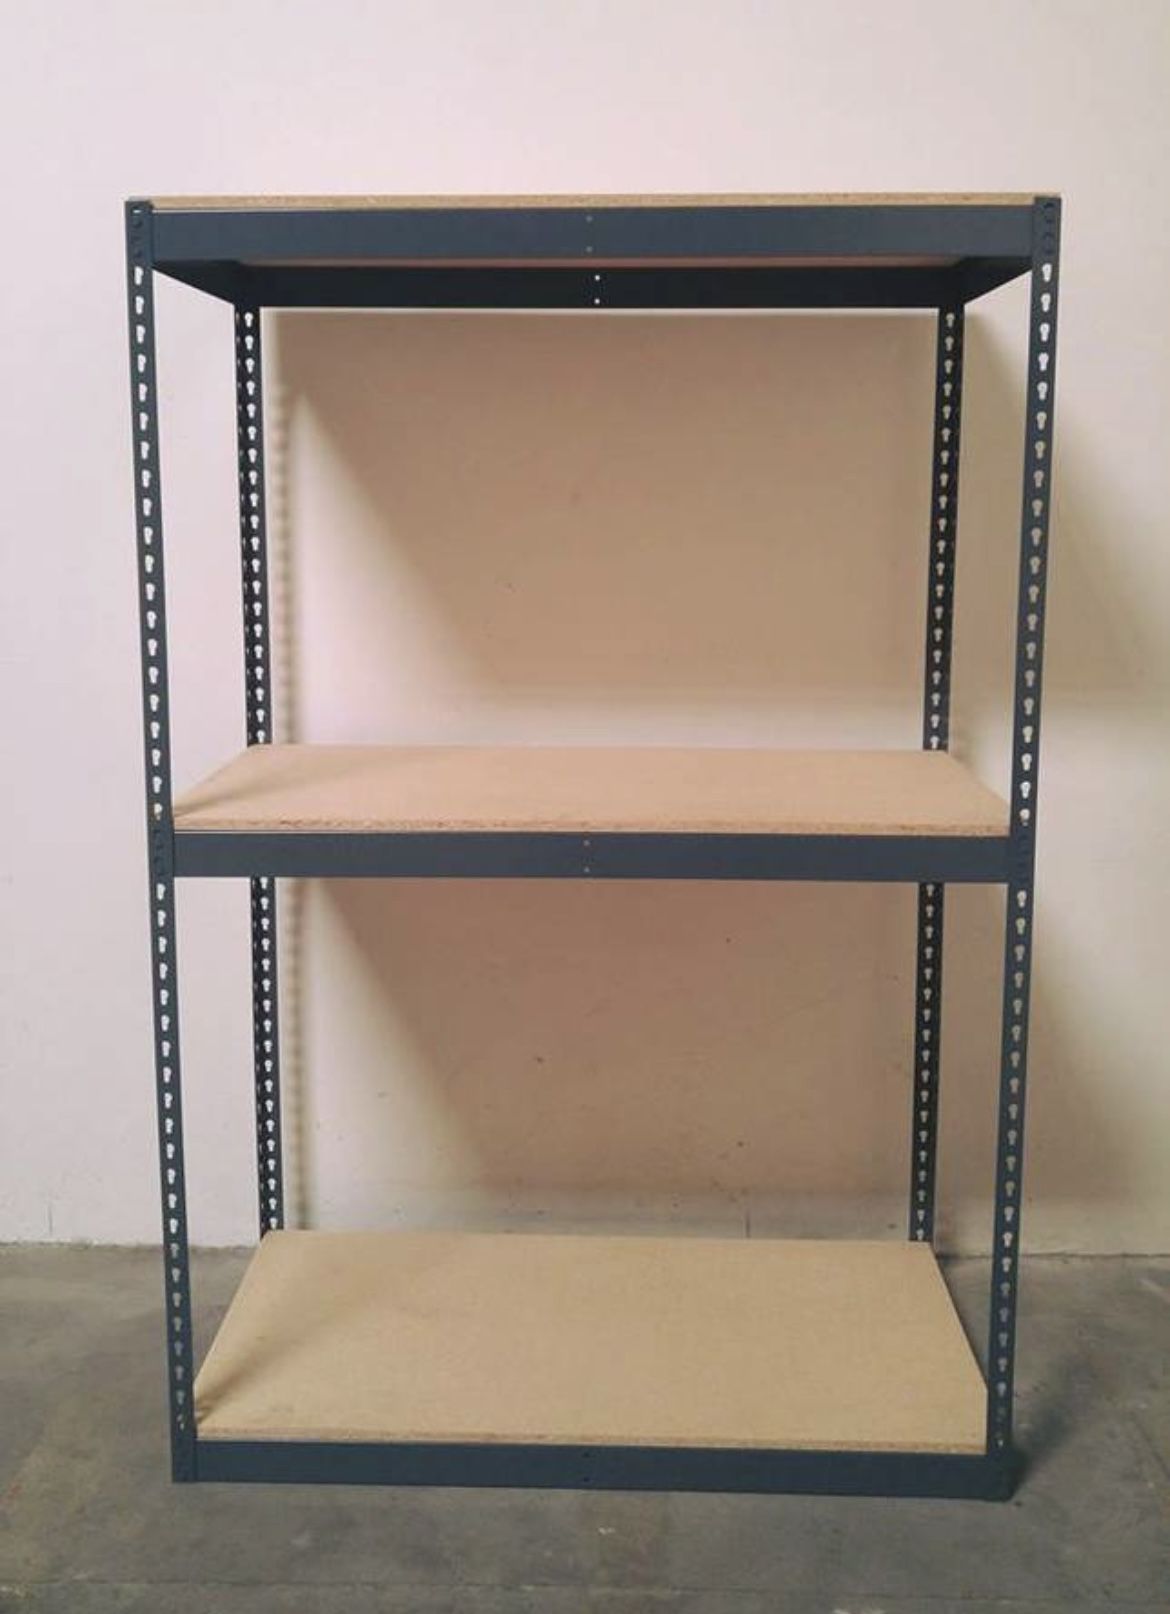 Shelving 48 in W x 18 in D Boltless Warehouse & Garage Racks Stronger Than Homedepot Lowes Delivery Available